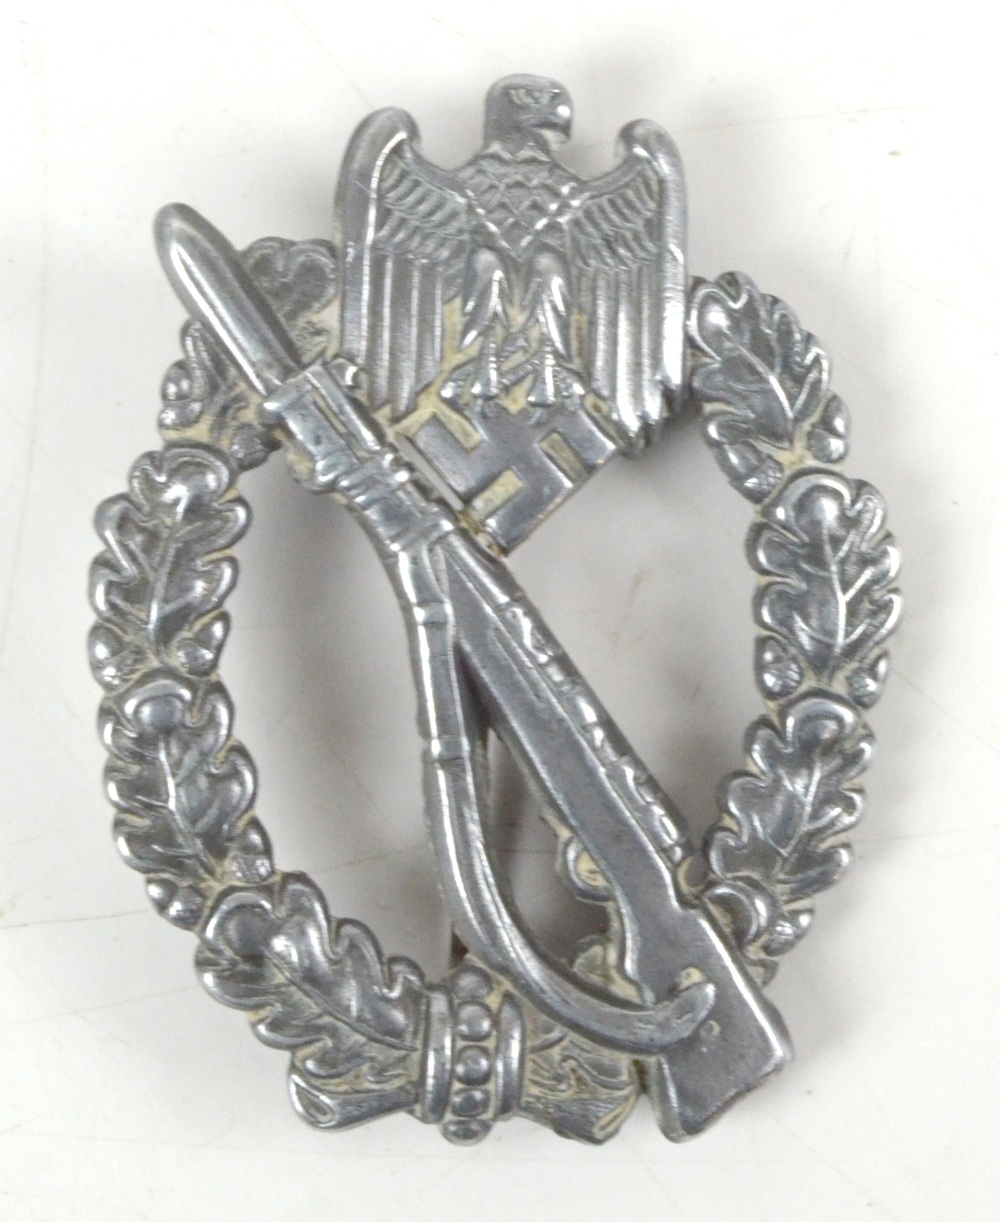 A Third Reich Infantry Assault badge, length 6cm.Additional InformationGeneral wear throughout.